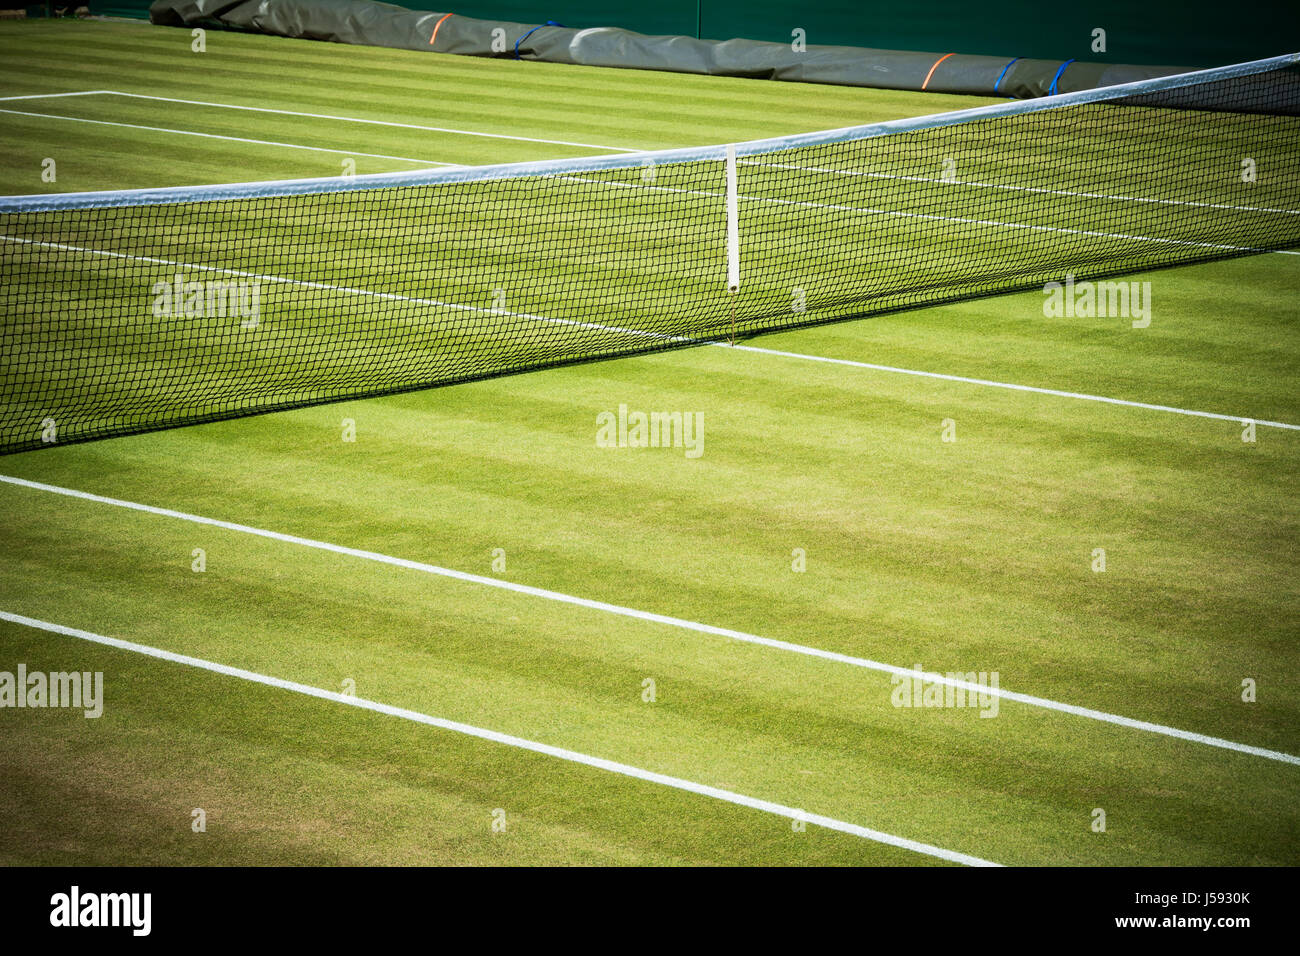 Tennis court and net Stock Photo